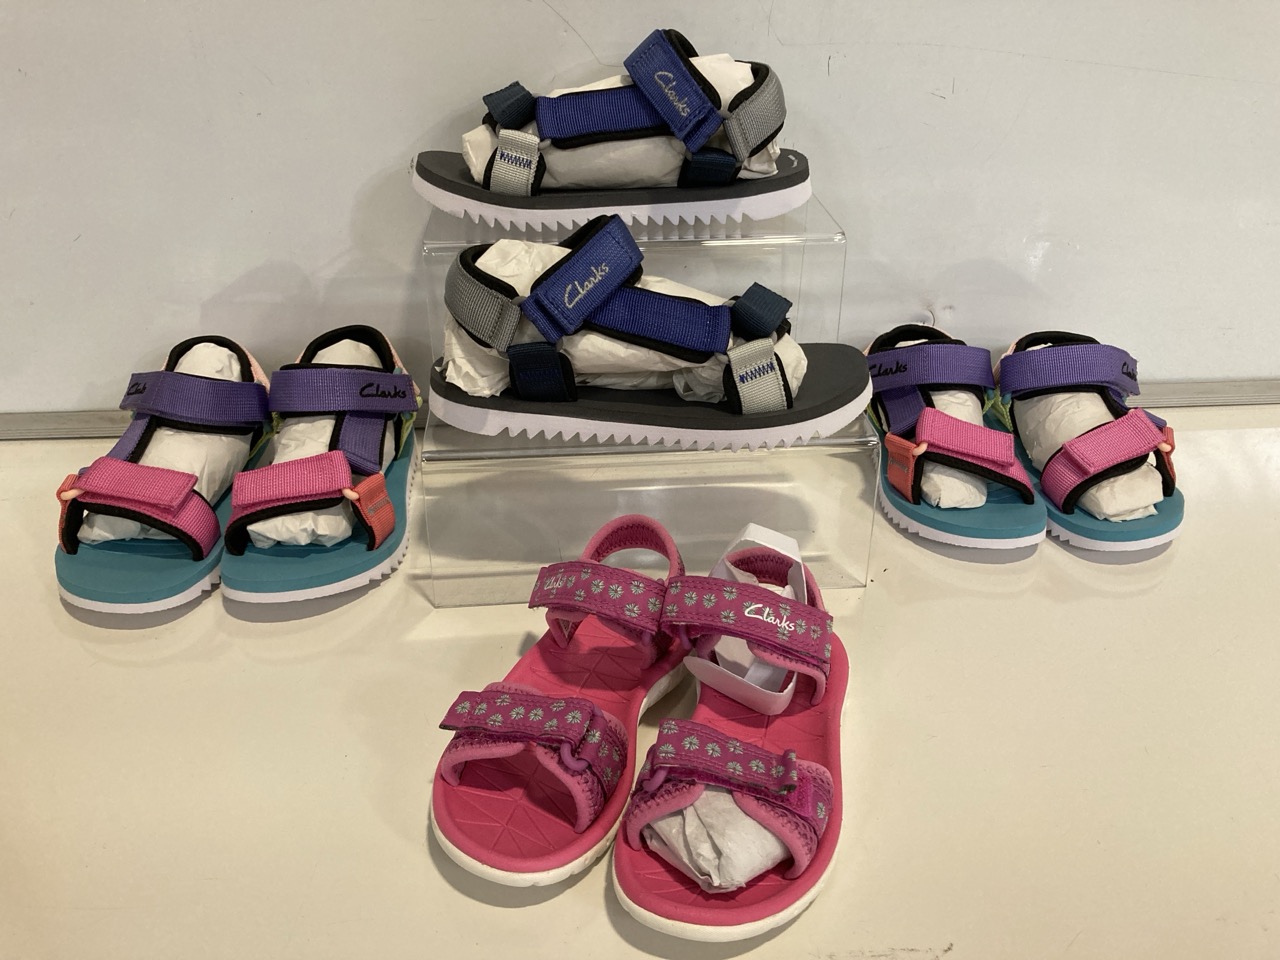 4 X PAIRS OF CLARKS CHILDREN'S FOOTWEAR, TO INCLUDE CLARKS SURF TIDE SANDALS IN HOT PINK, UK SIZE 9